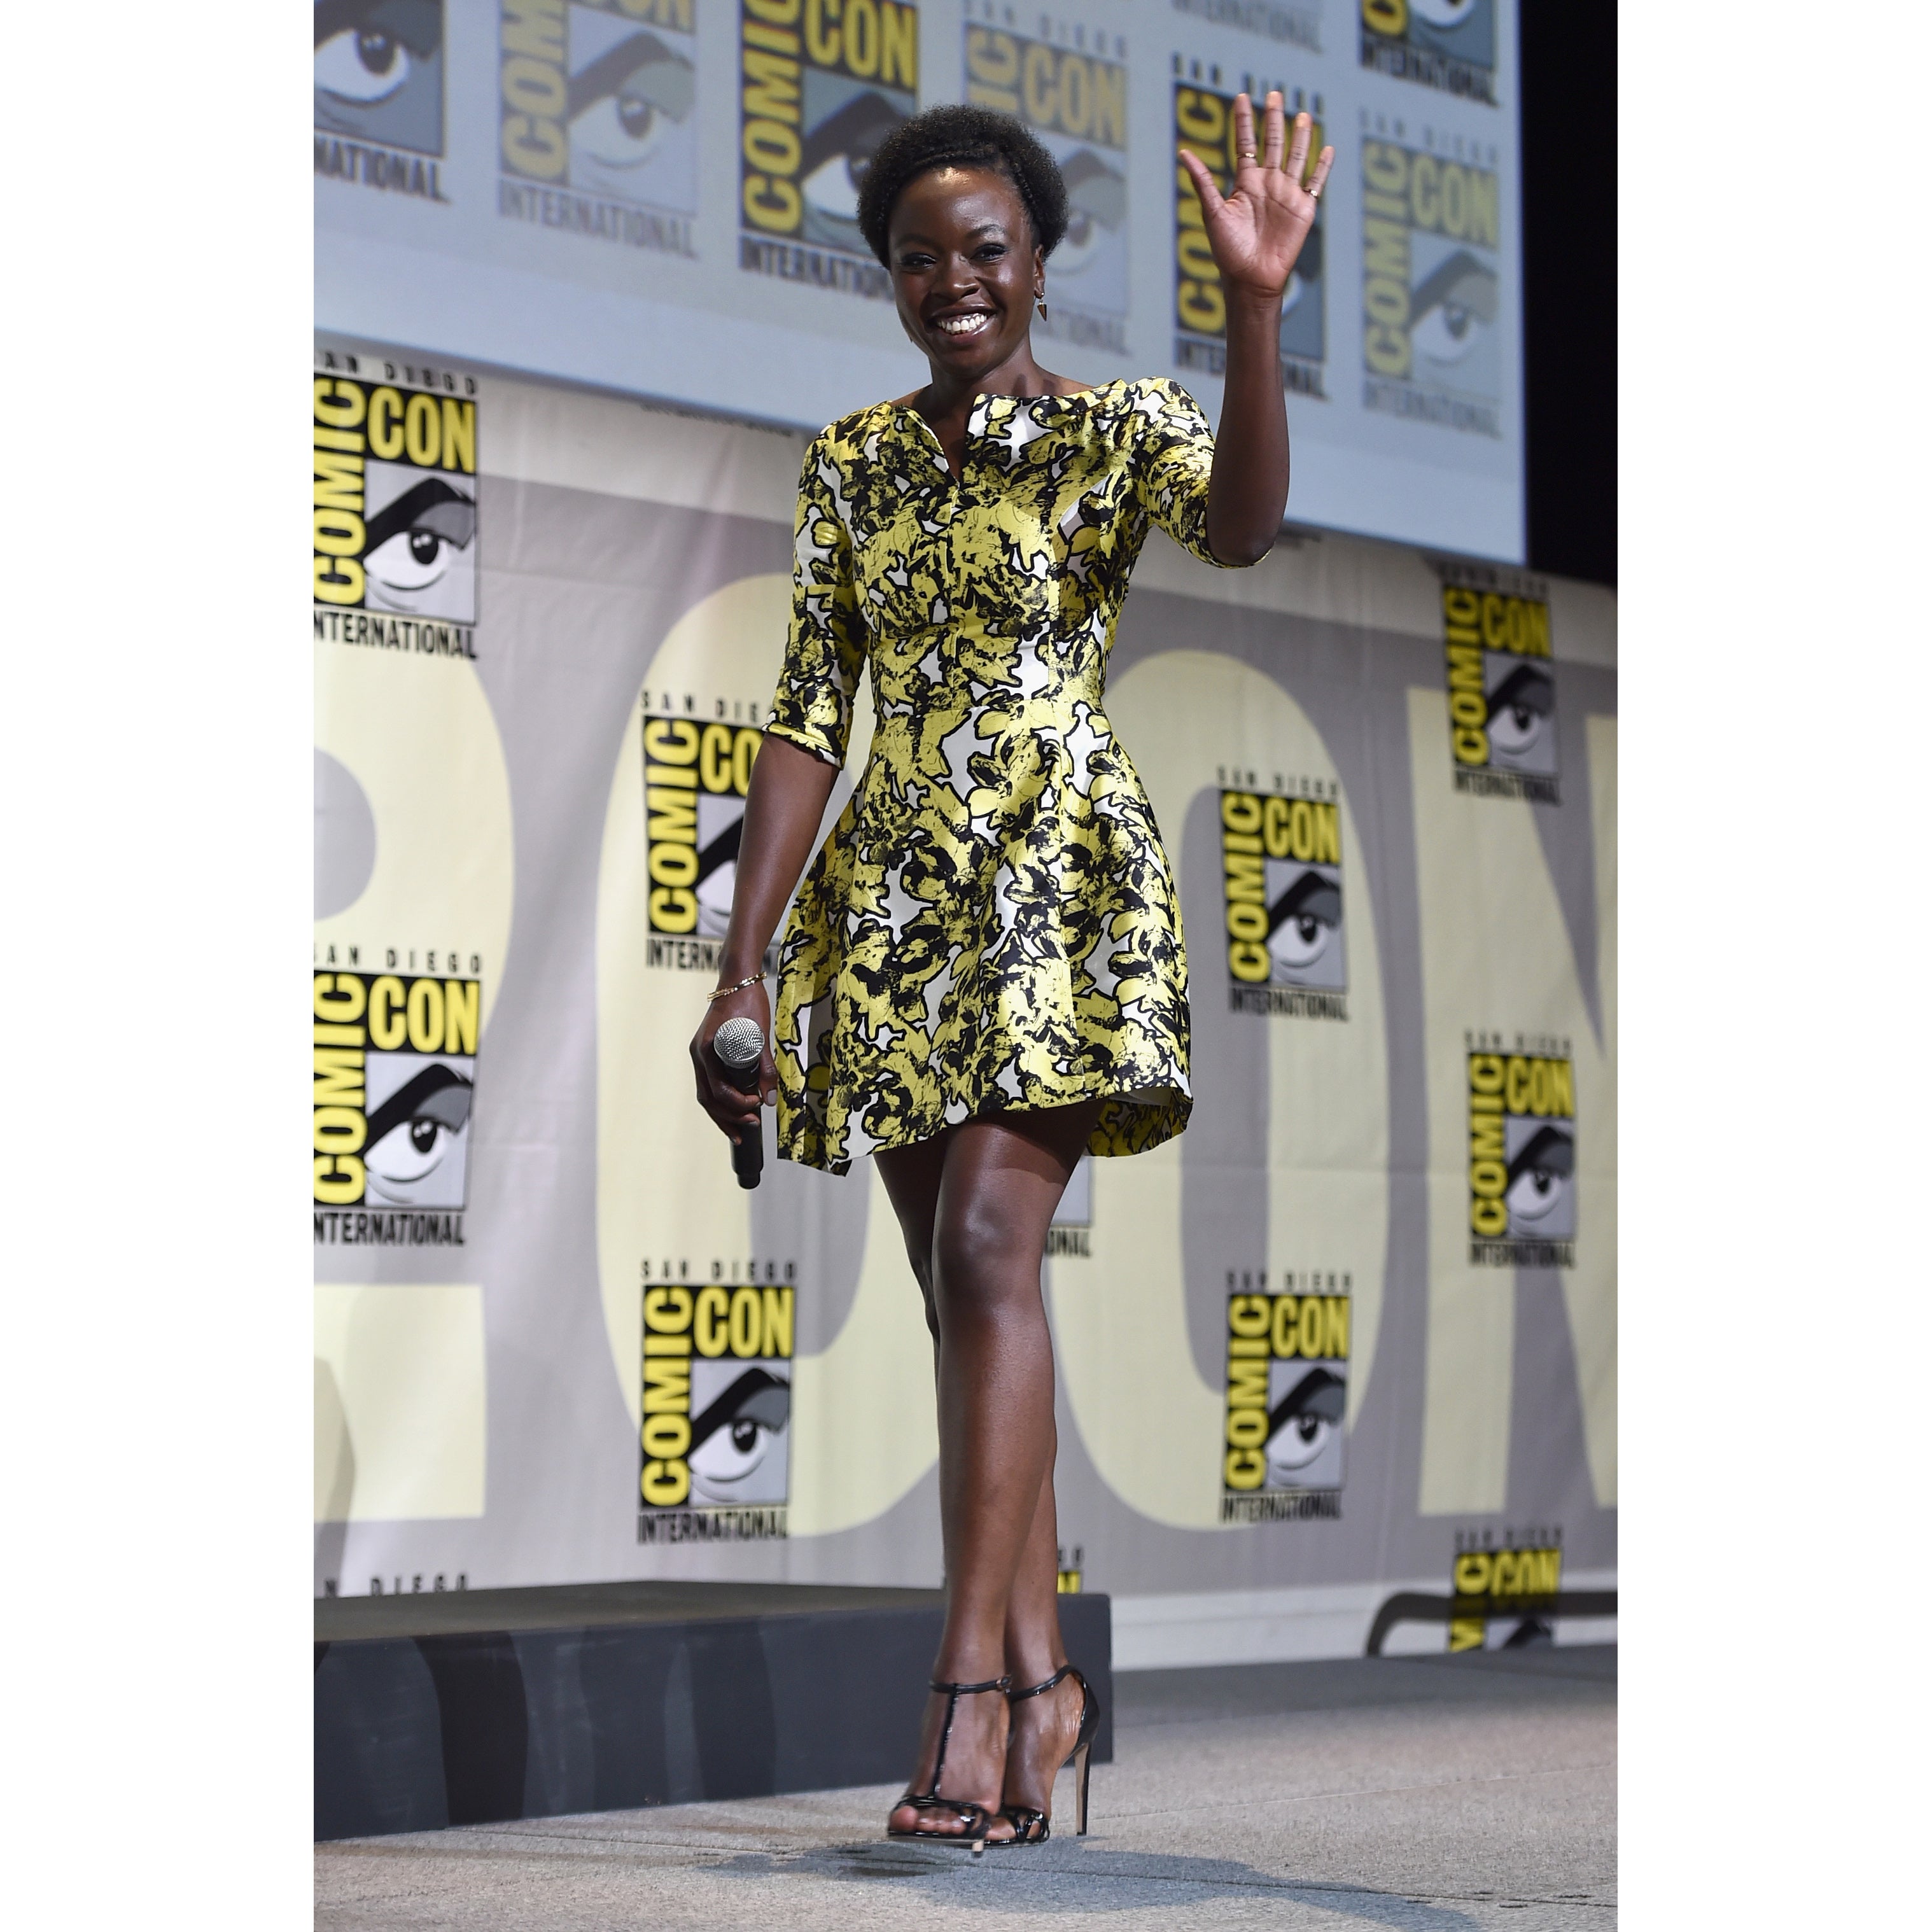 Comic-Con 2016: The Cast of 'Black Panther,' Zendaya, Will Smith and More!
